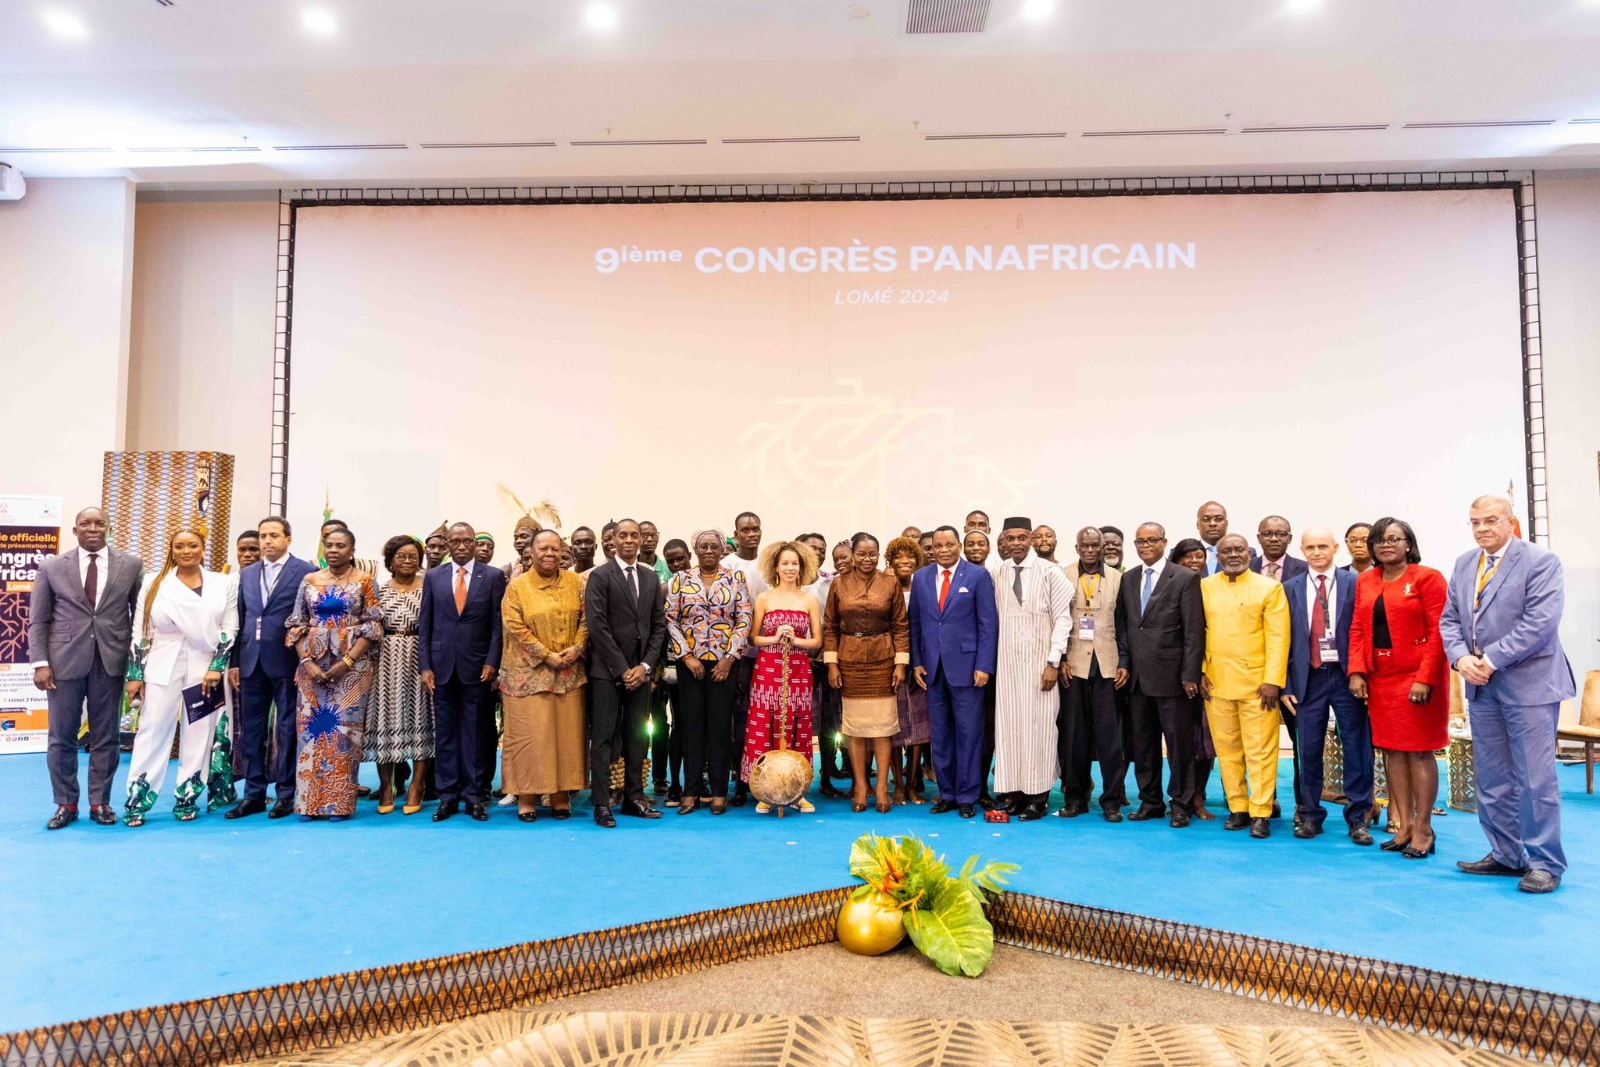 Launching Ceremony of the 9th Pan-African Congress